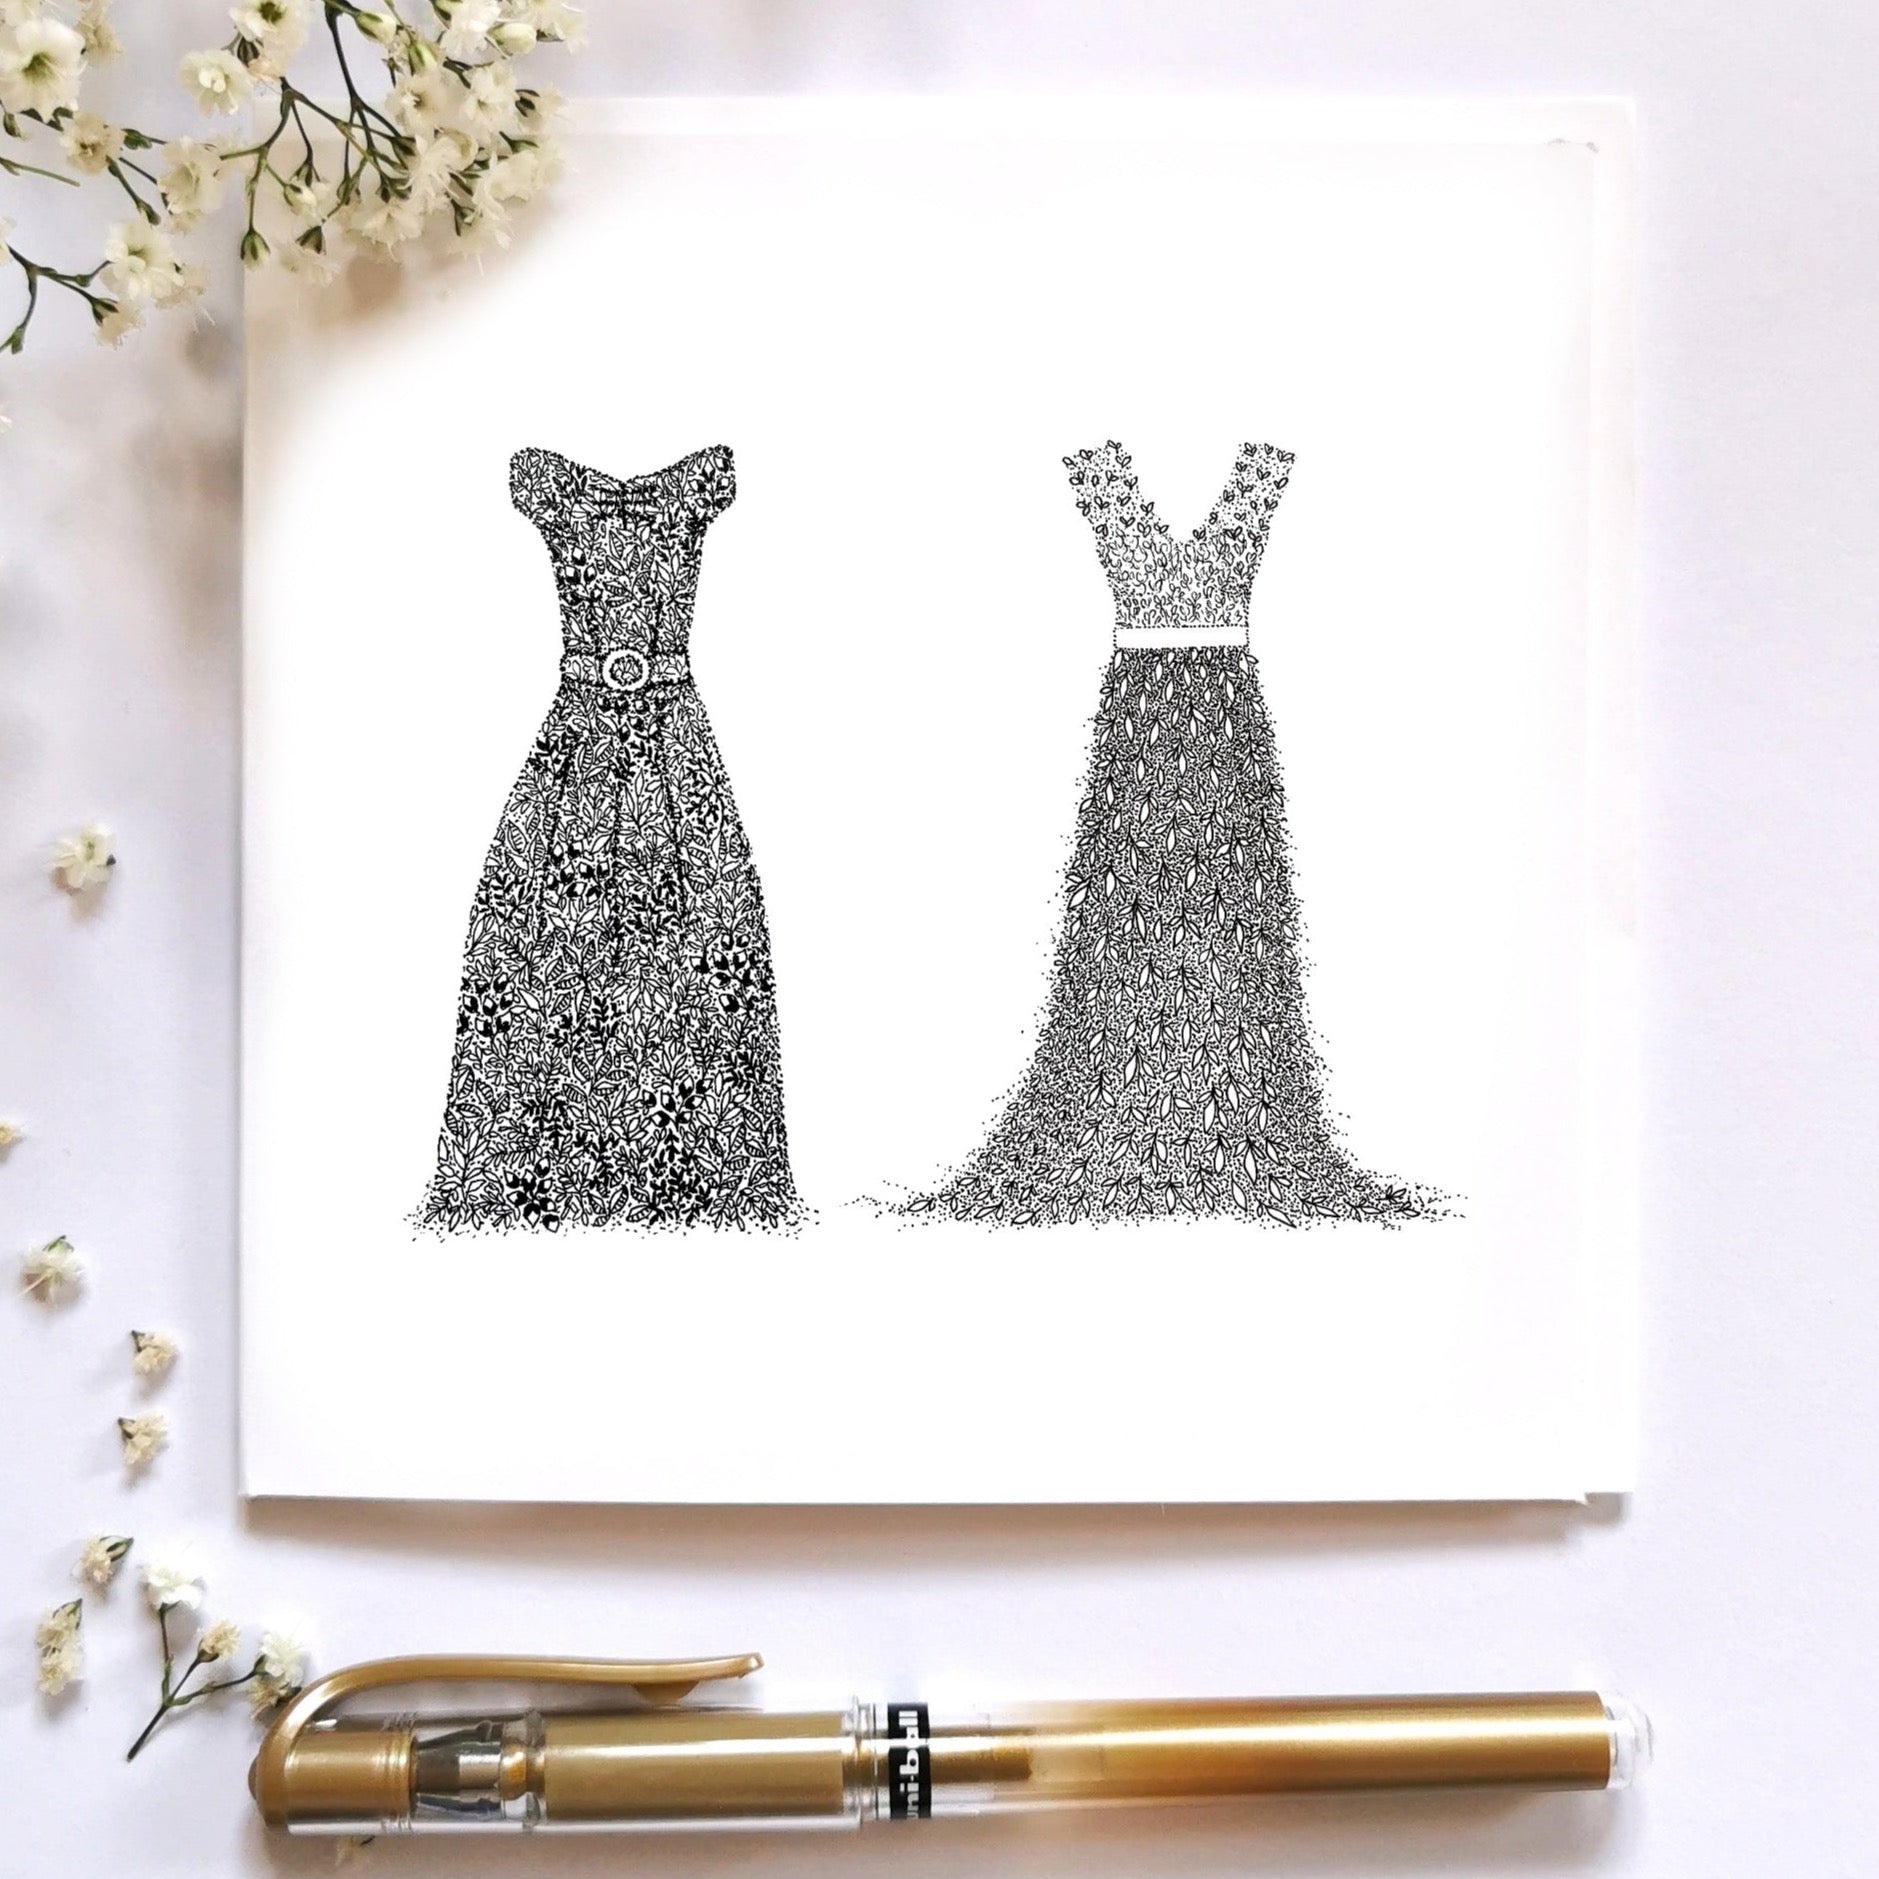 Image shows MRS & MRS card illustration. both titles are portrayed by dresses, the one on the left being a short sleeve dress with belt in the middle and more structure and the one to the right being a floral summer-y vibe dress more flowy. Both dresses are hand drawn using floral drawings. Image entirely black and white. Image is displayed on a cream surface with floral arrangements and a gold pen surrounding it to show image dressed up. 